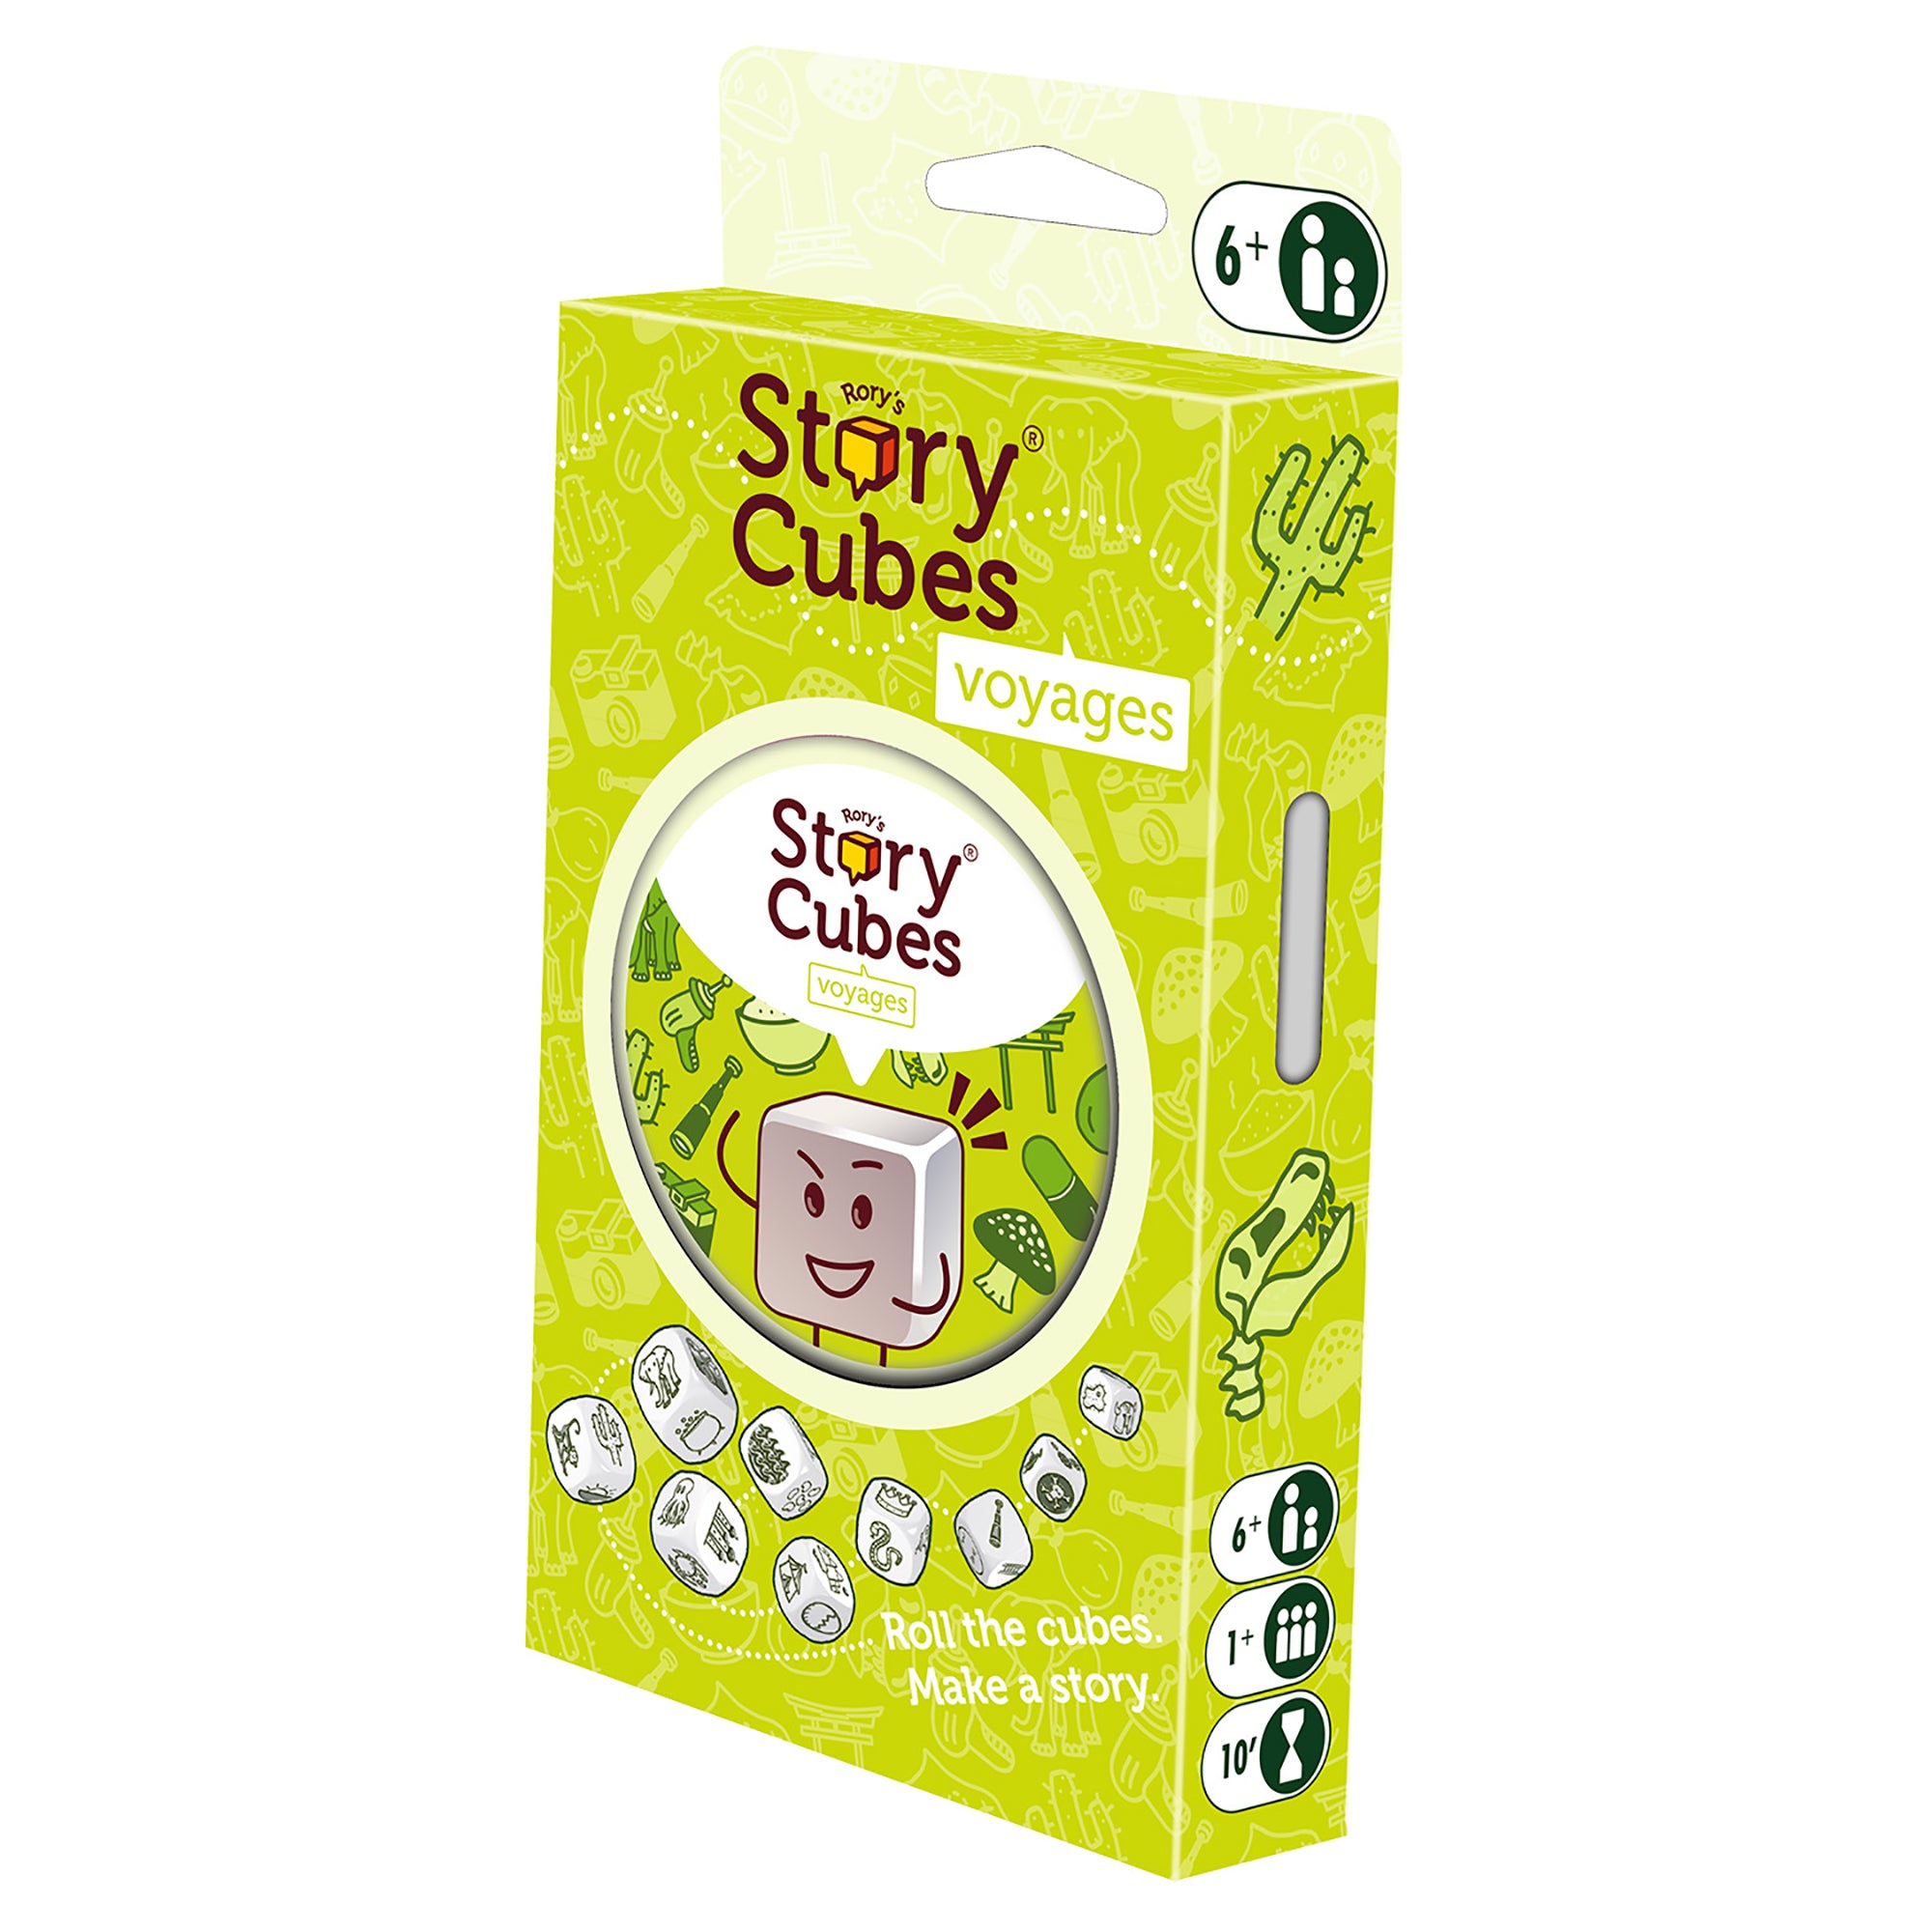 Rory Story Cubes Voyages - Multilingual 6+